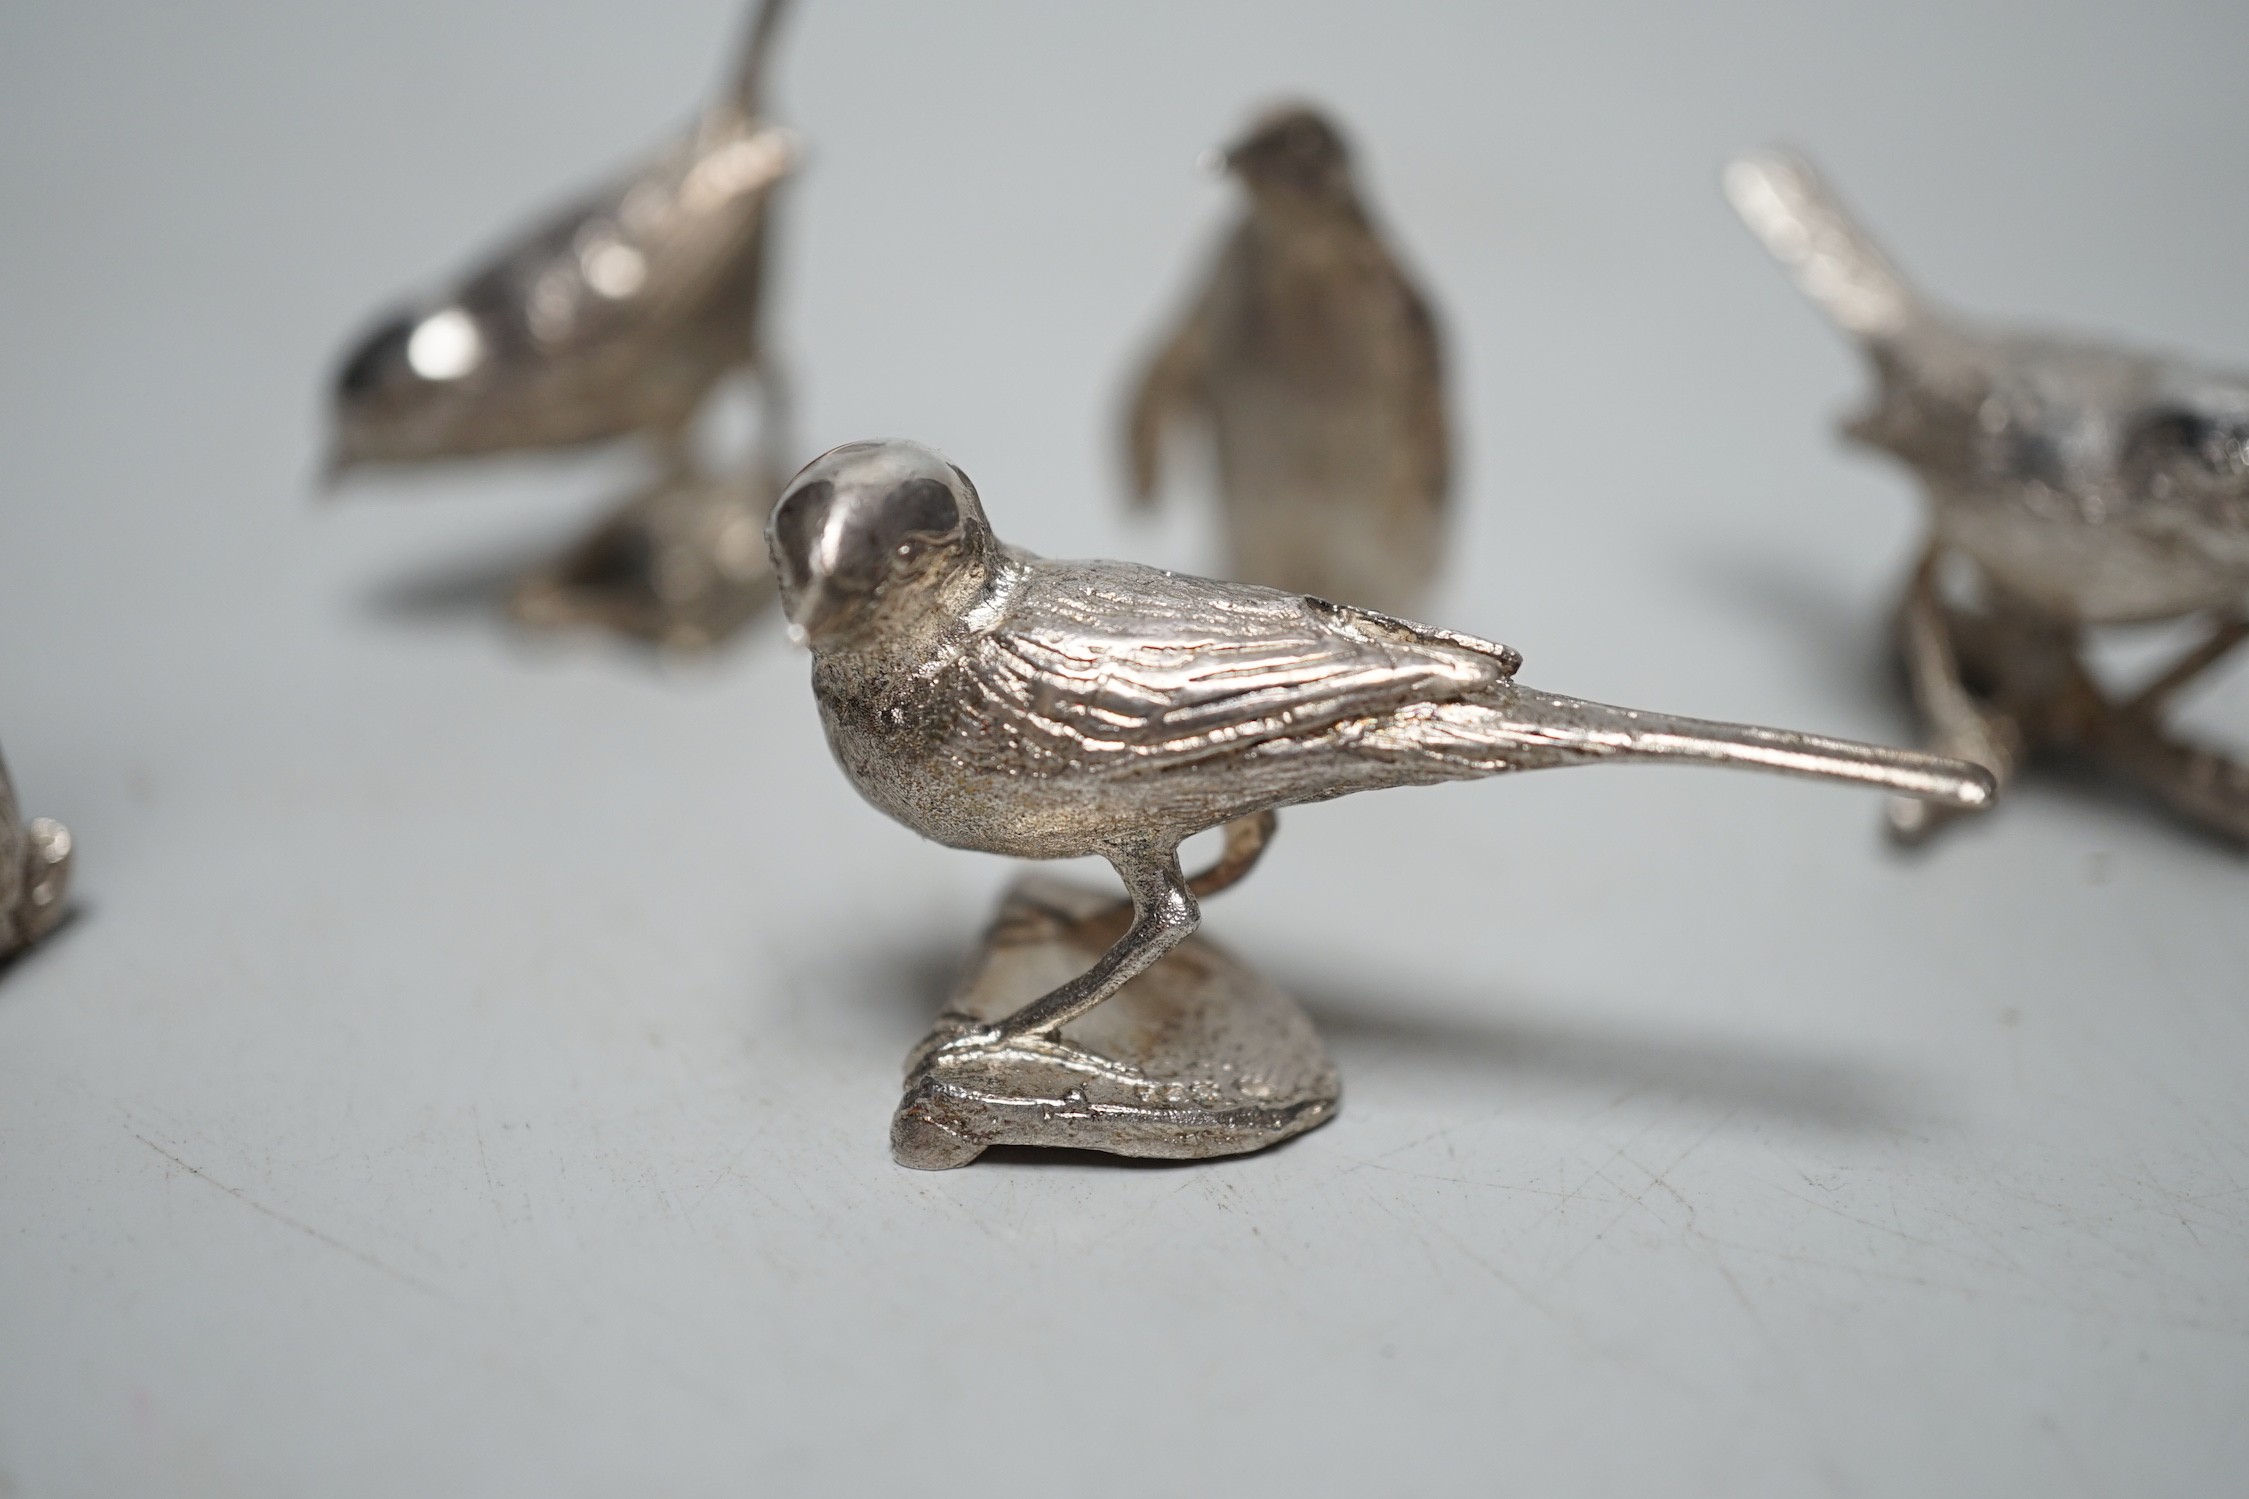 A small collection of seven 1980's/1990's miniature silver models, by Paul Eaton, comprising five birds, a rabbit and a penguin, tallest 43mm.